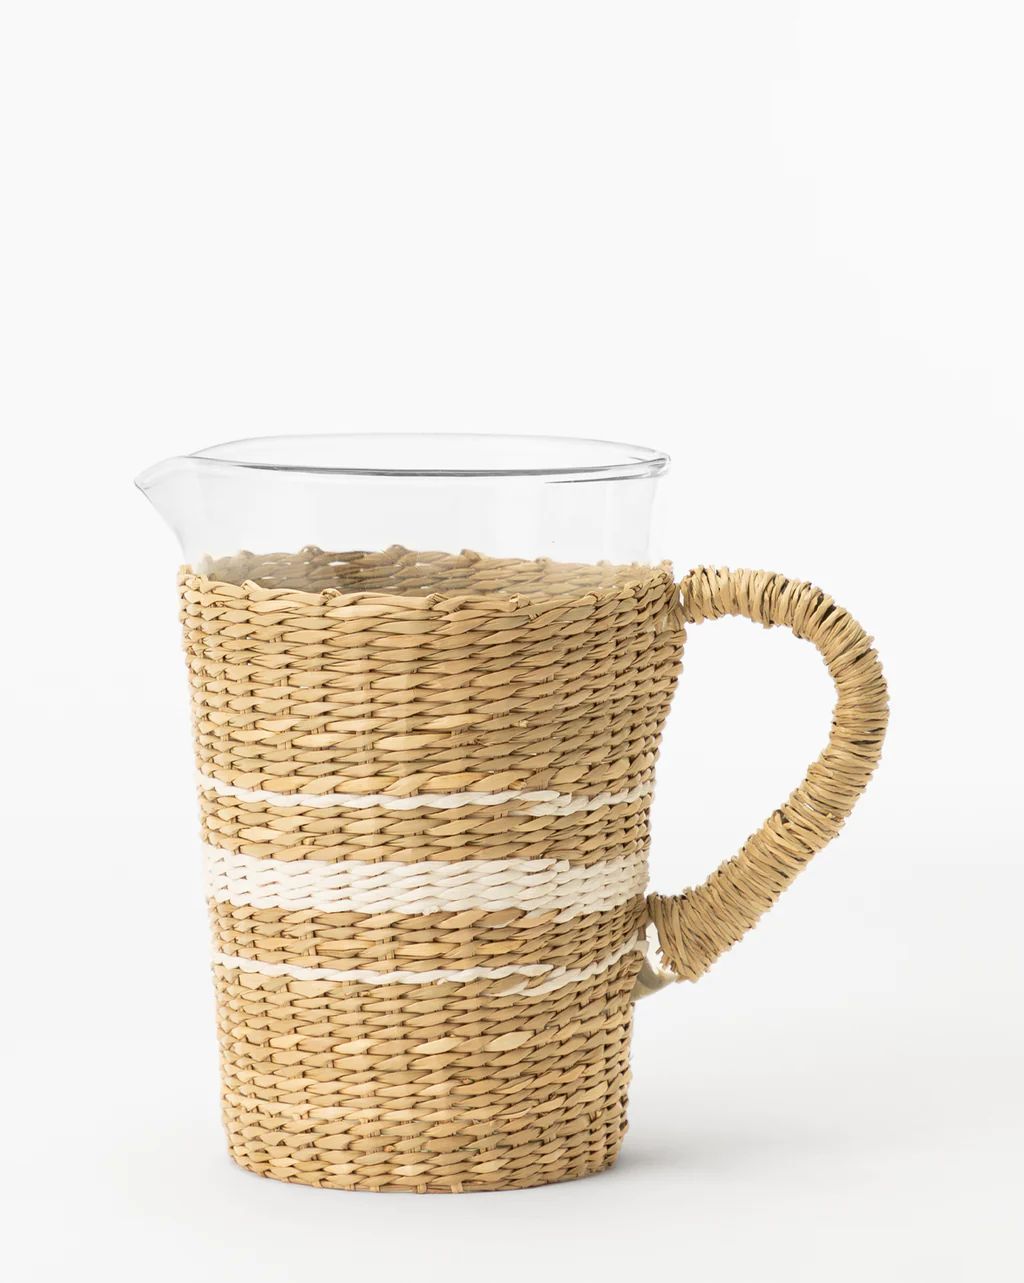 Seagrass Wrapped Pitcher | McGee & Co.